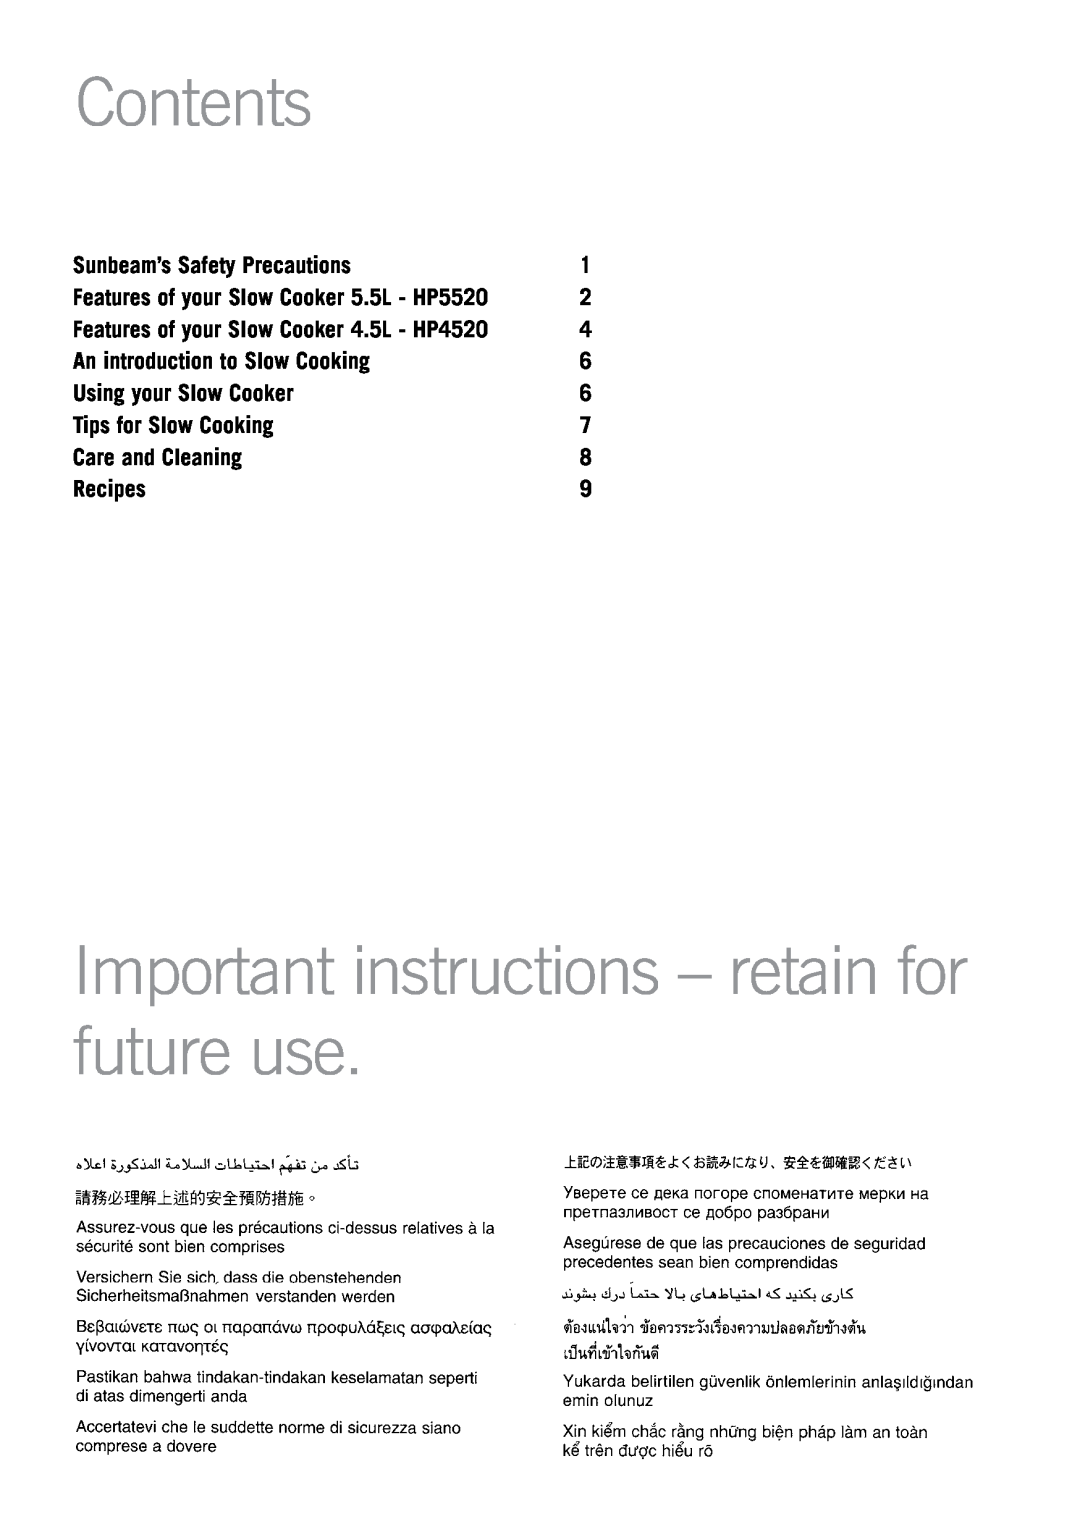 Sunbeam HP5520 Contents, Important instructions - retain for future use, Sunbeam’s Safety Precautions, Care and Cleaning 